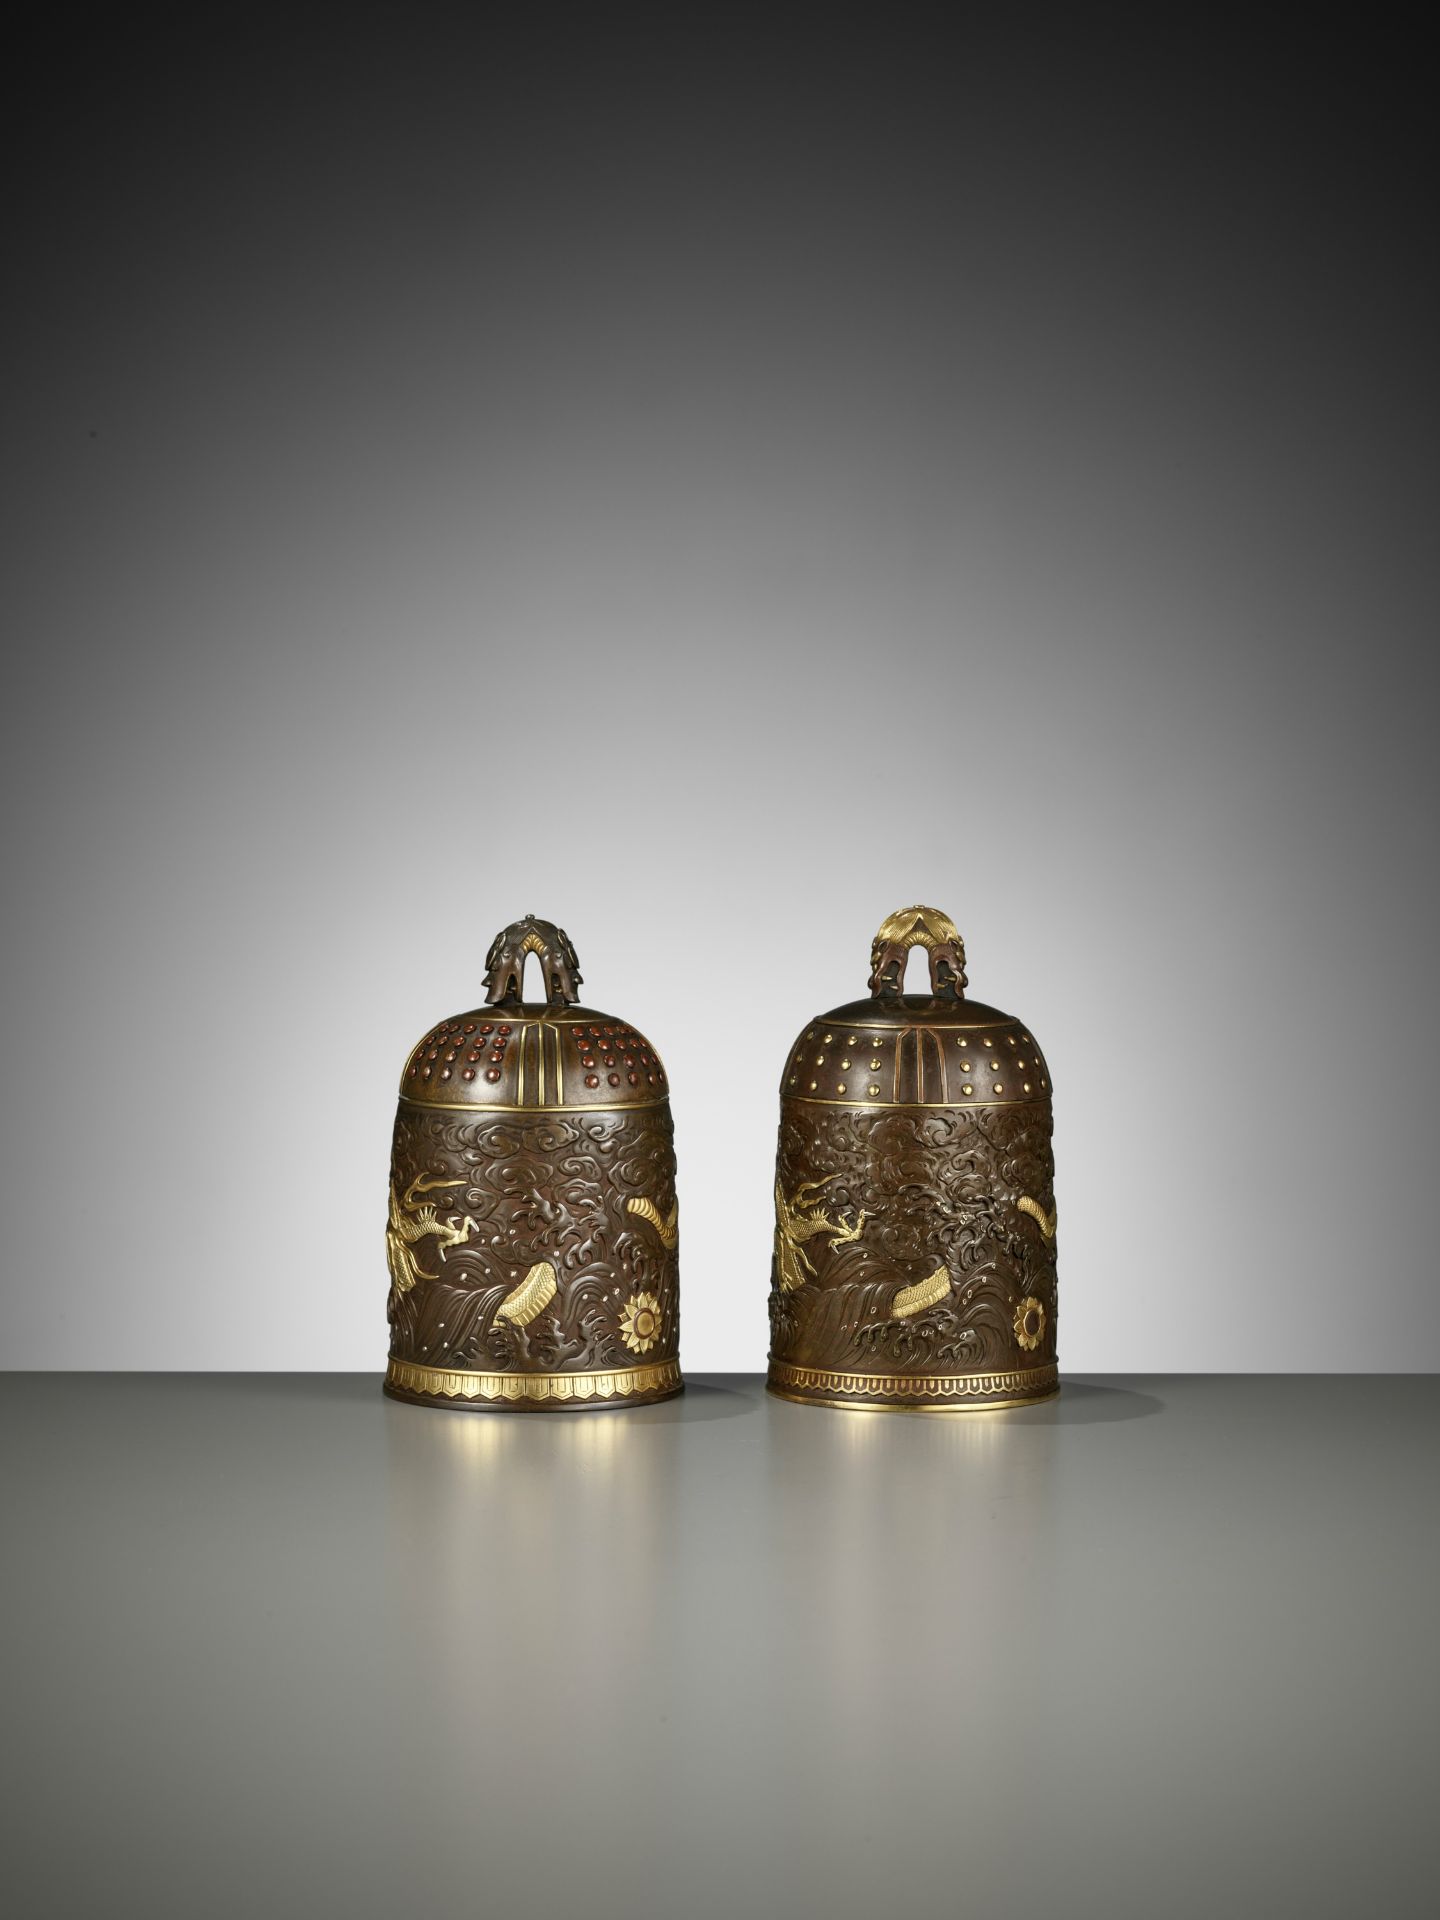 A MATCHED PAIR OF GOLD-INLAID BRONZE 'BUDDHIST TEMPLE BELL' KOGO, ONE BY MIYABE ATSUYOSHI - Image 8 of 15